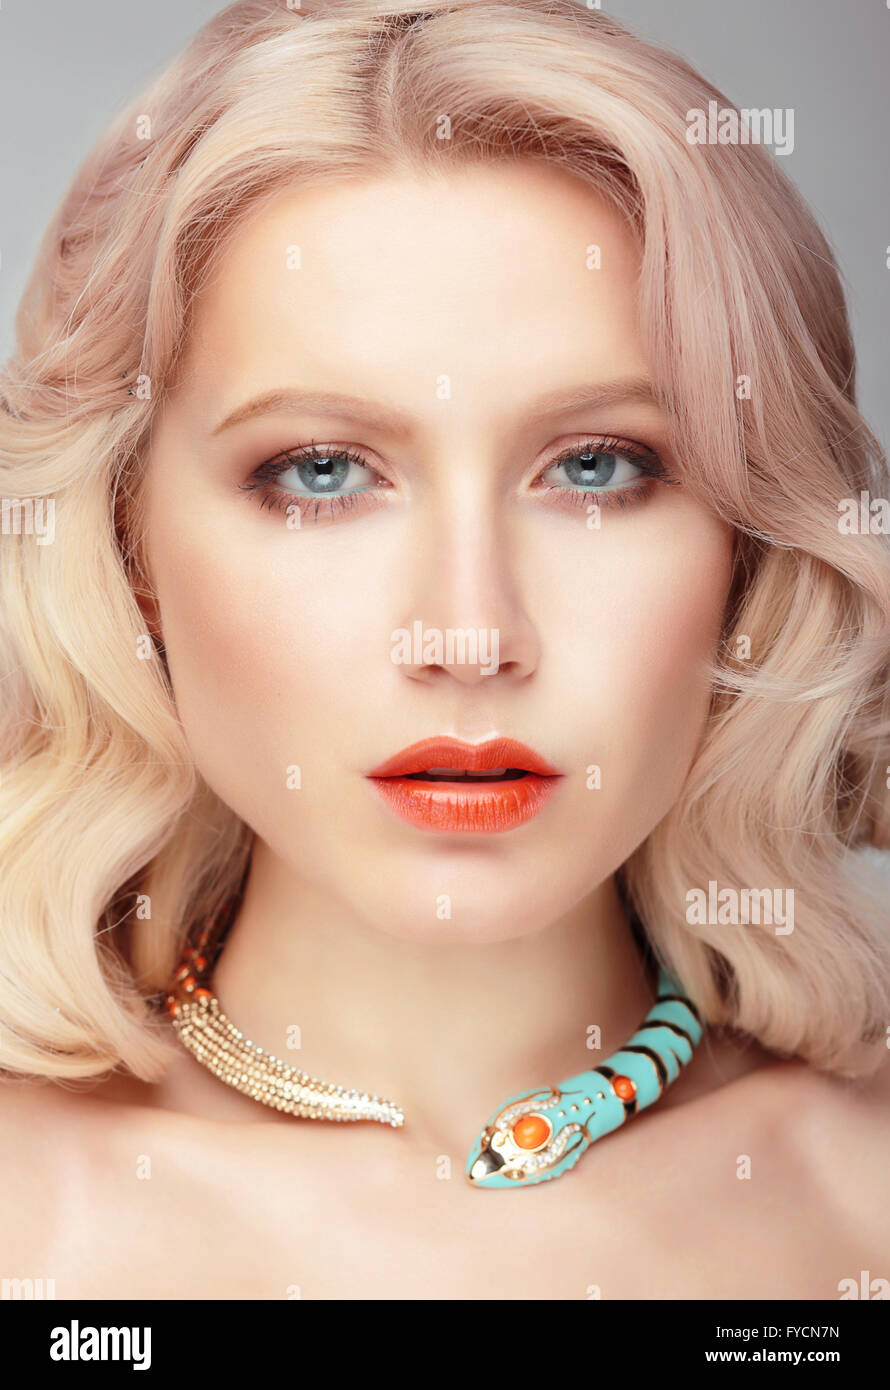 The woman's face with a gentle make-up and jewelry in the form of a snake around her neck. Stock Photo